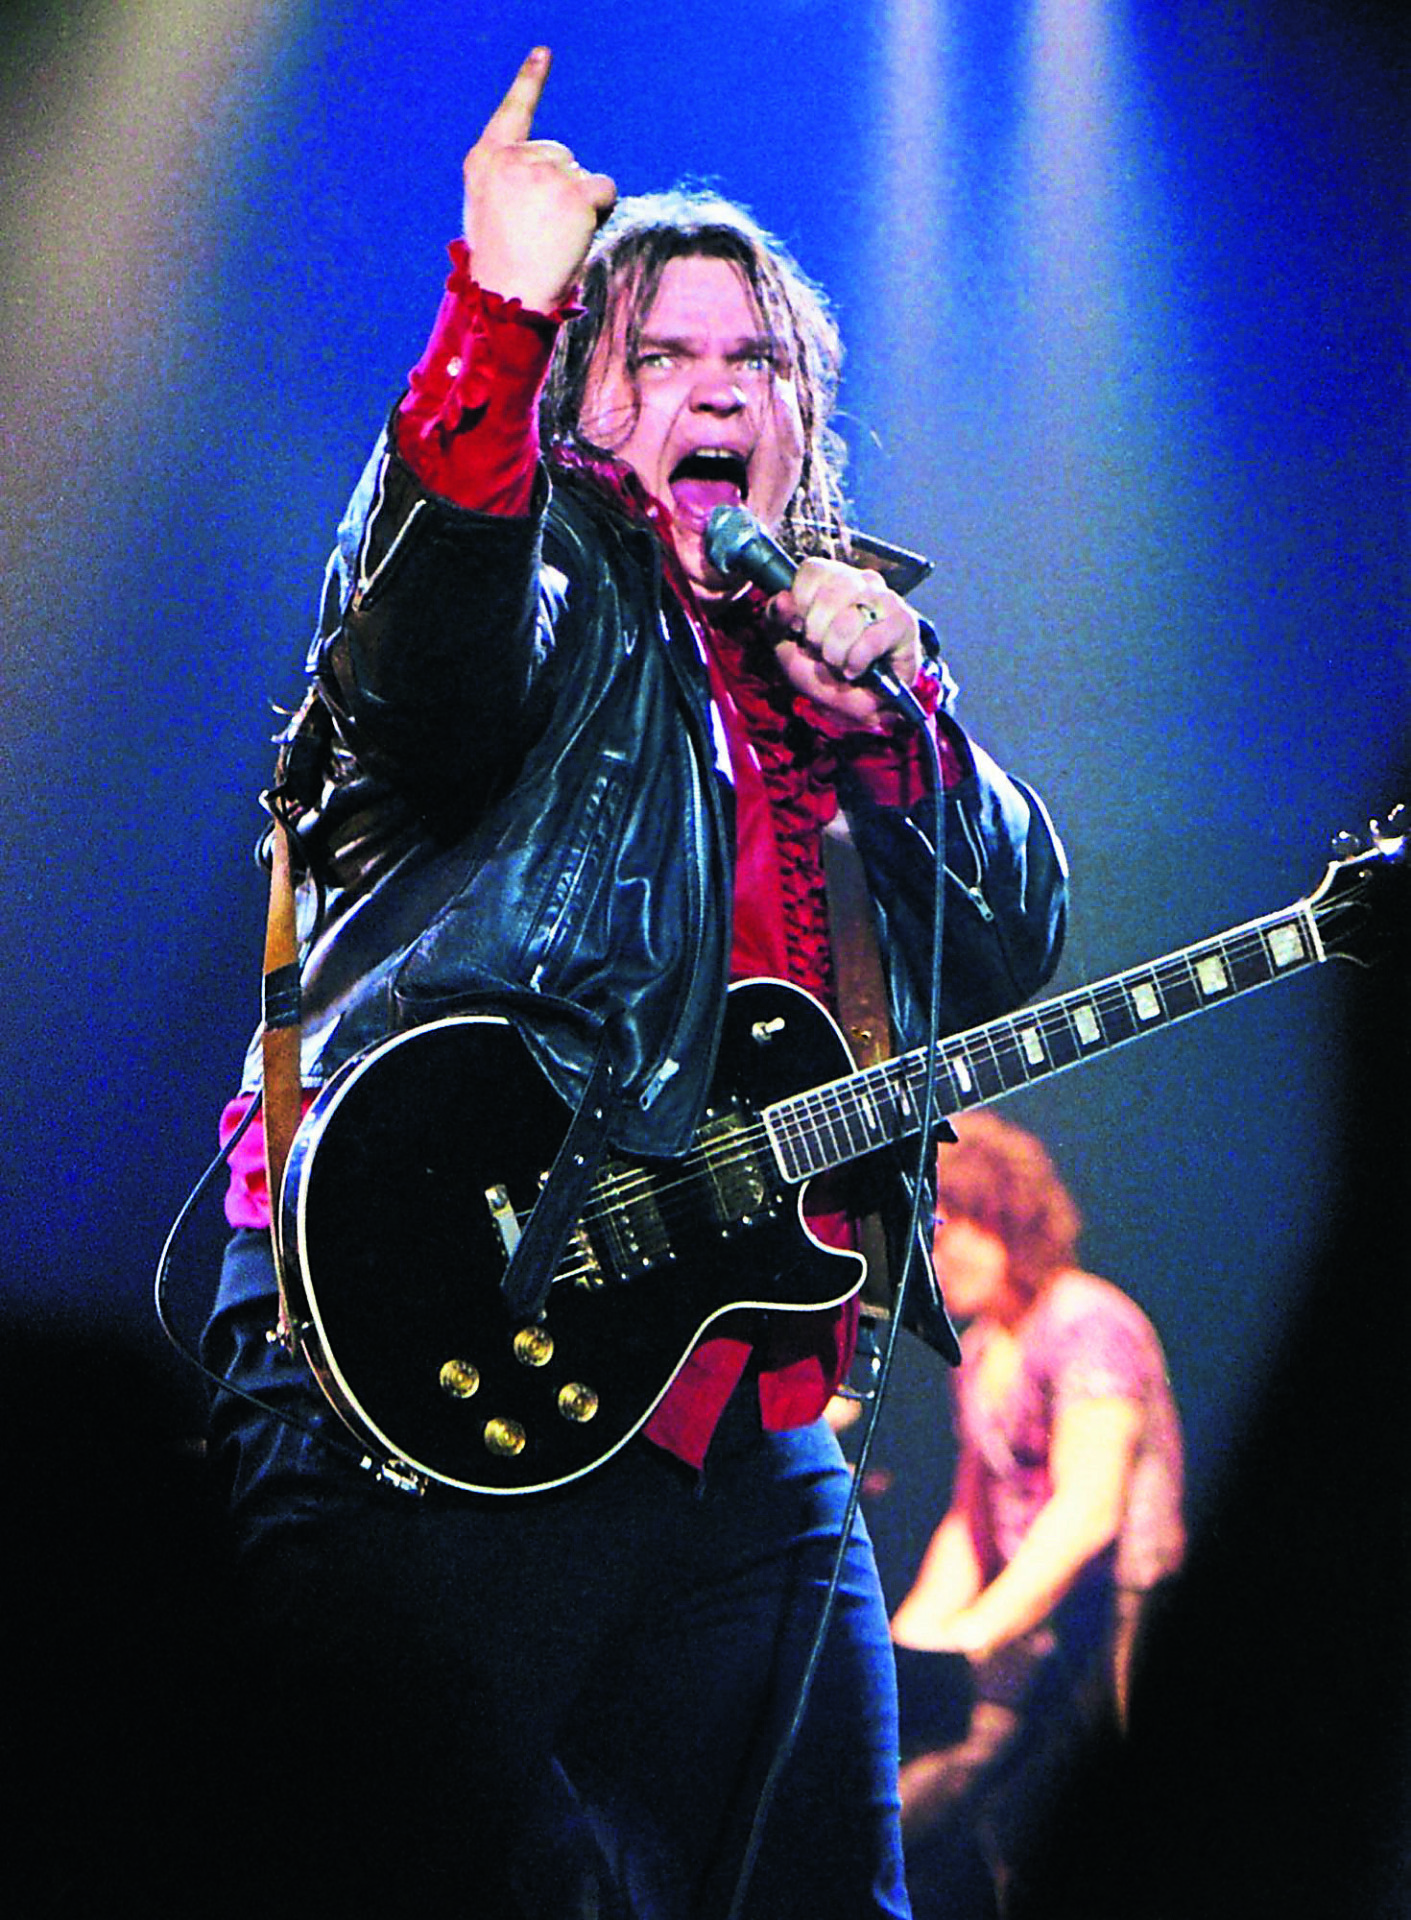 A Hell of a night…When Meat Loaf rocked Bundoran and ended up getting sued